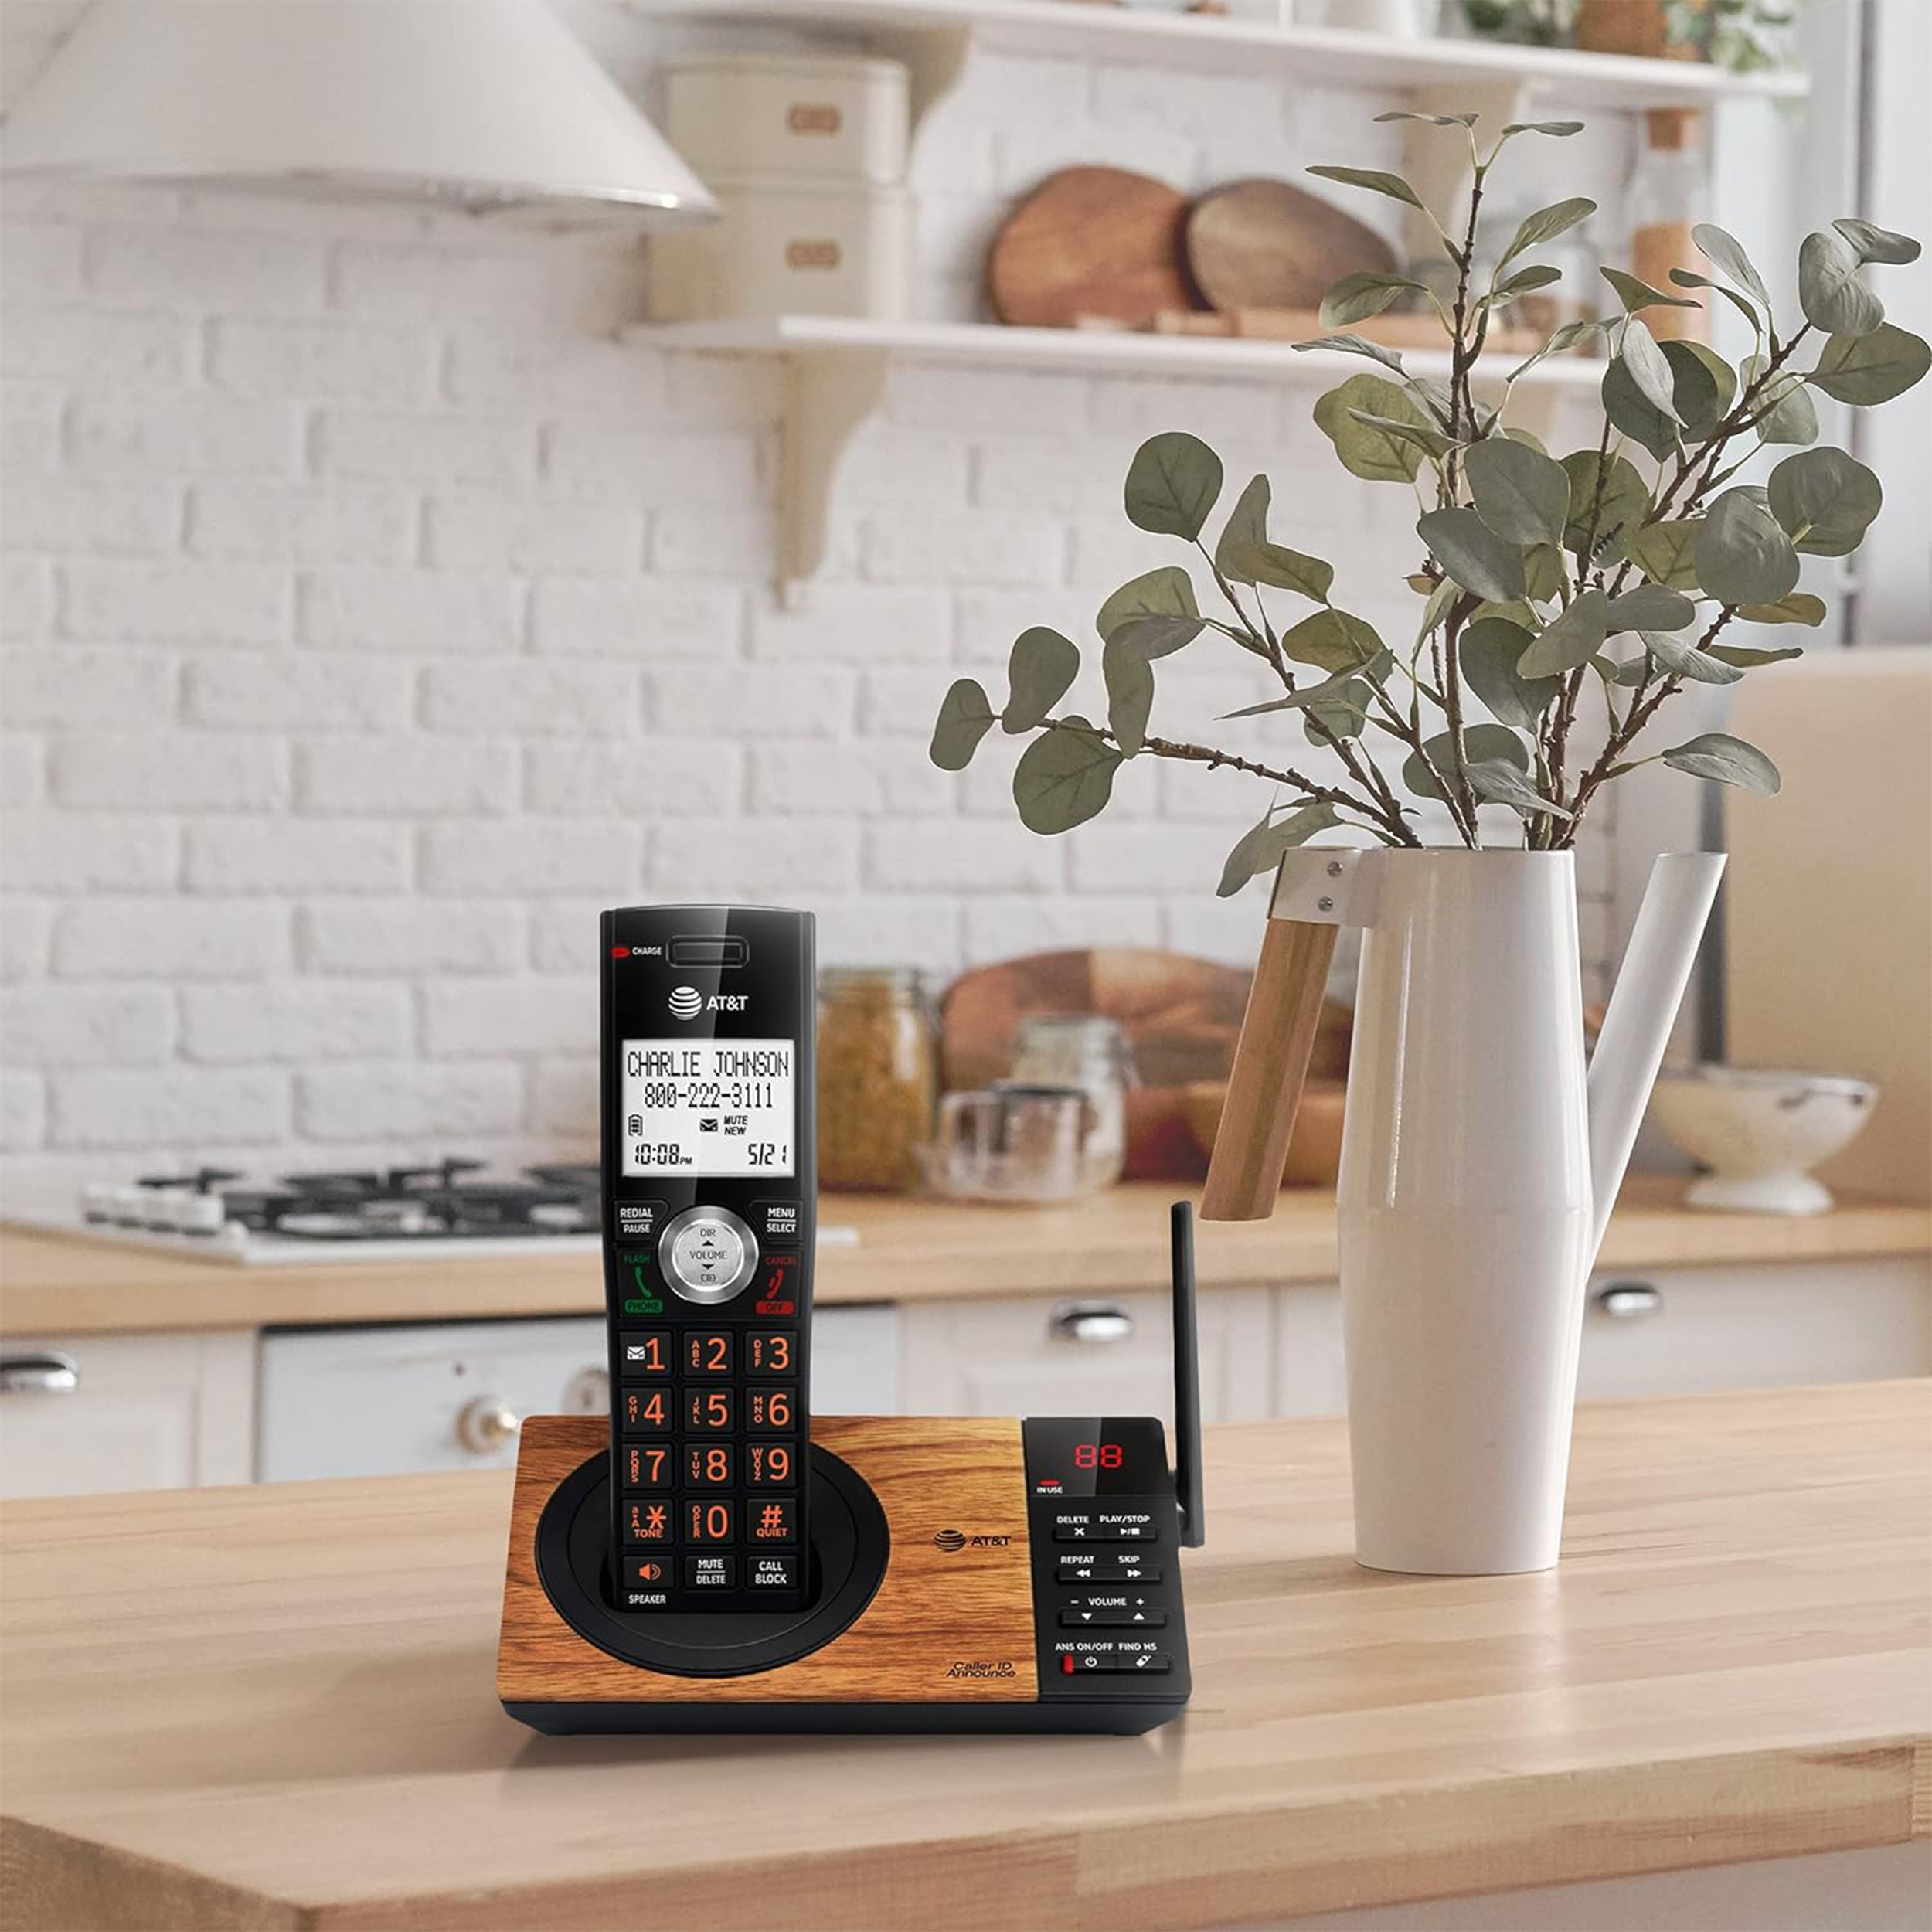 1-Handset Expandable Cordless Phone with Unsurpassed Range, Smart Call Blocker and Answering System - view 13